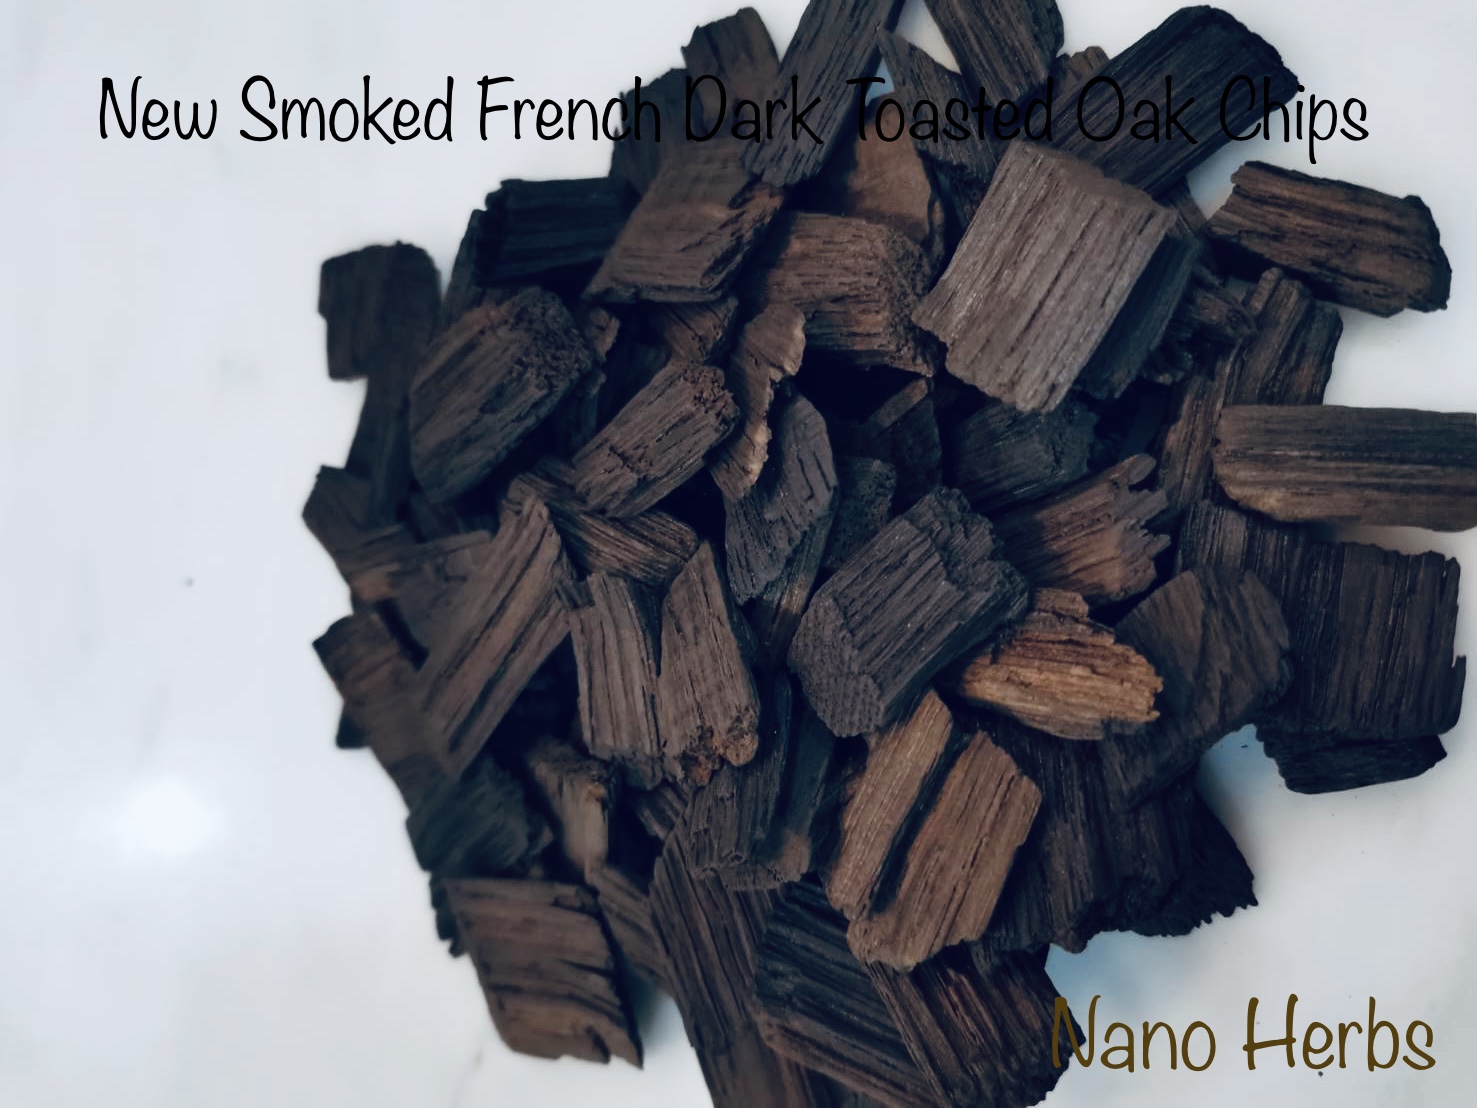 28g - 500g: เกล็ดไม้โอ๊คฝรั่งเศส คั่วเข้ม รมควันแบบดั้งเดิม : TRADITIONAL MILDLY SMOKED French Dark Toasted Oak Chips For BBQ or Home Brewing Wine Making to Provide the Flavour of Oak Barrel